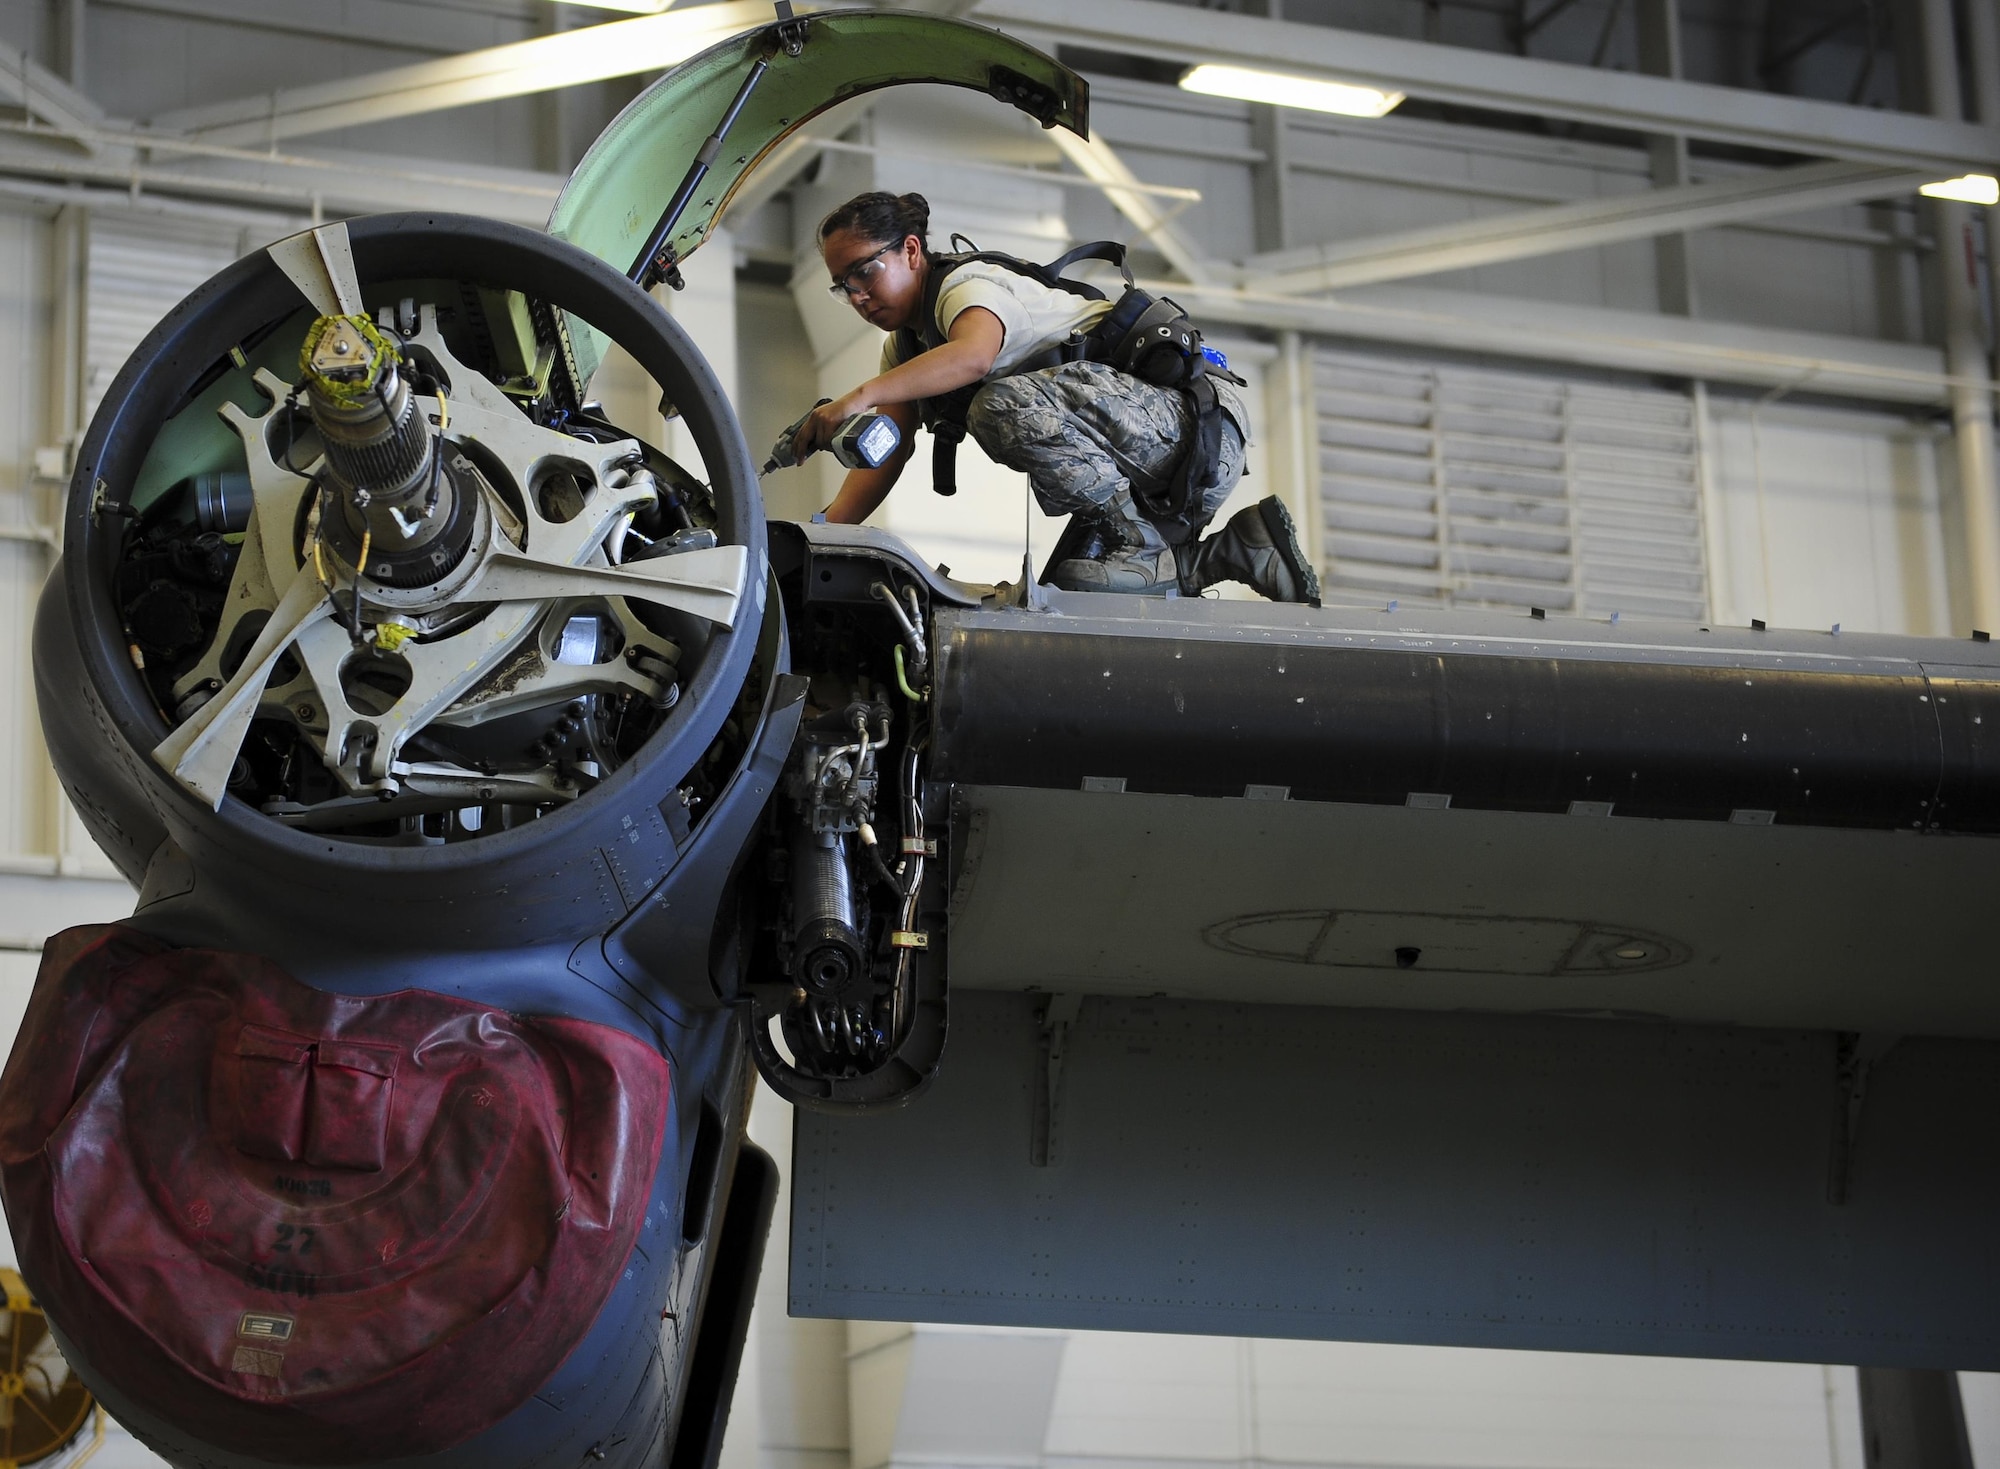 Senior Airman Mayra Tiebout, 801st Special Operations Aircraft Maintenance Squadron electrical and environmental technician, replaces gas generators on a CV-22B Osprey at Hurlburt Field Fla., July 20, 2015. The 801st SOAMXS’s mission is to perform all equipment maintenance in support of worldwide special operations missions in response to national command authority taskings for the CV-22B Osprey and the MC-130H Talon II. Maintenance includes aircraft servicing, phase inspections, troubleshooting, repair, modifications and launch recovery for all aircraft. (U.S. Air Force photo/Senior Airman Meagan Schutter)